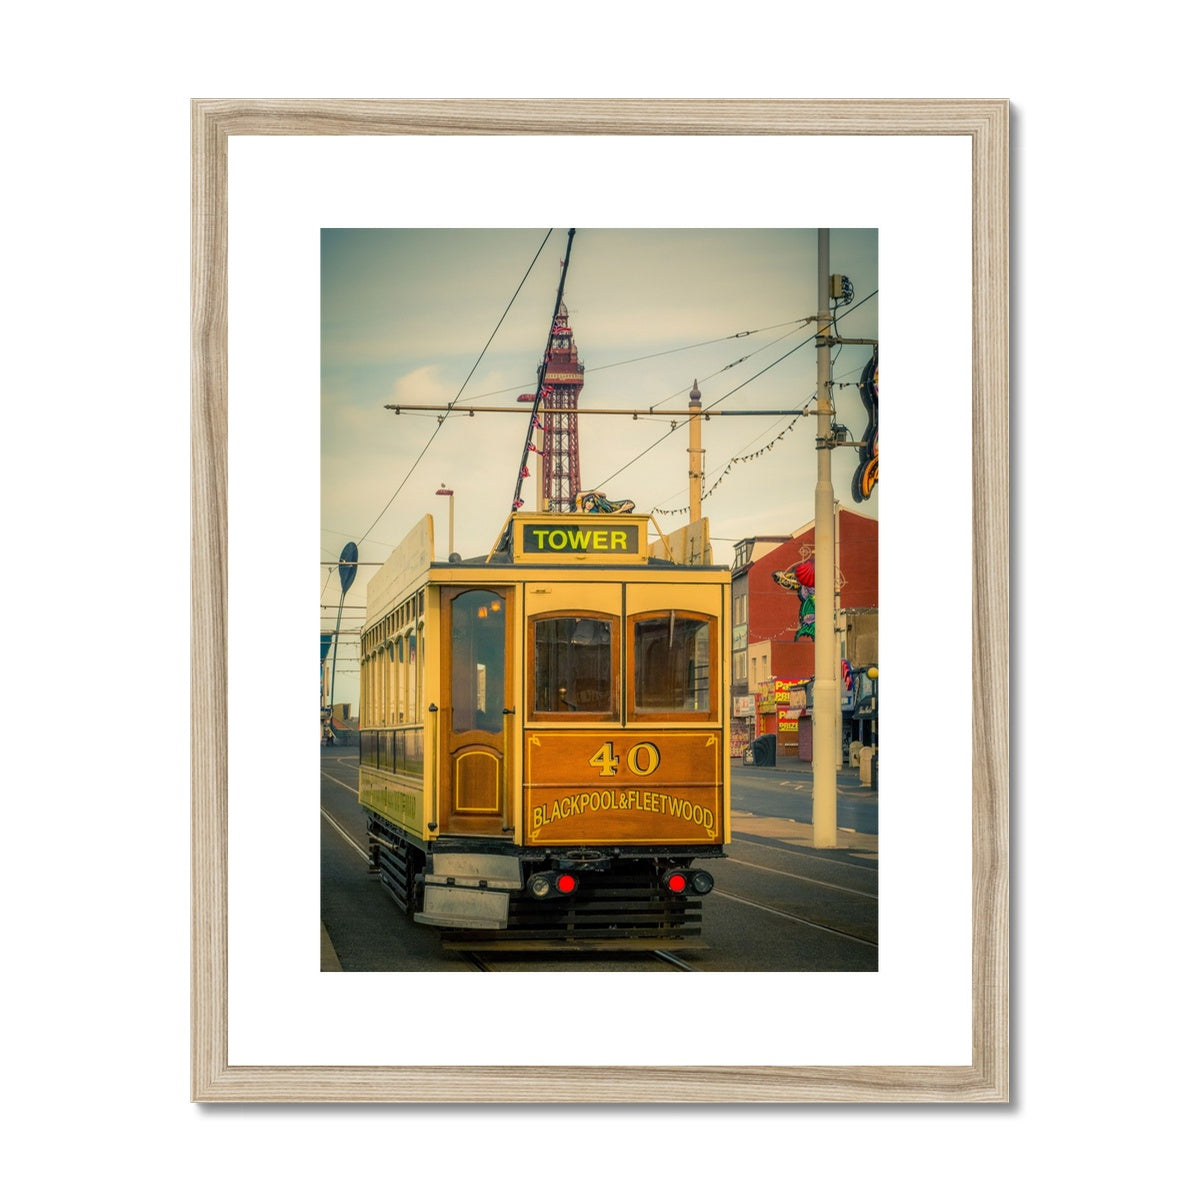 Traditional tram running along seafront promenade with Blackpool Tower in background - Blackpool,UK. Framed & Mounted Print